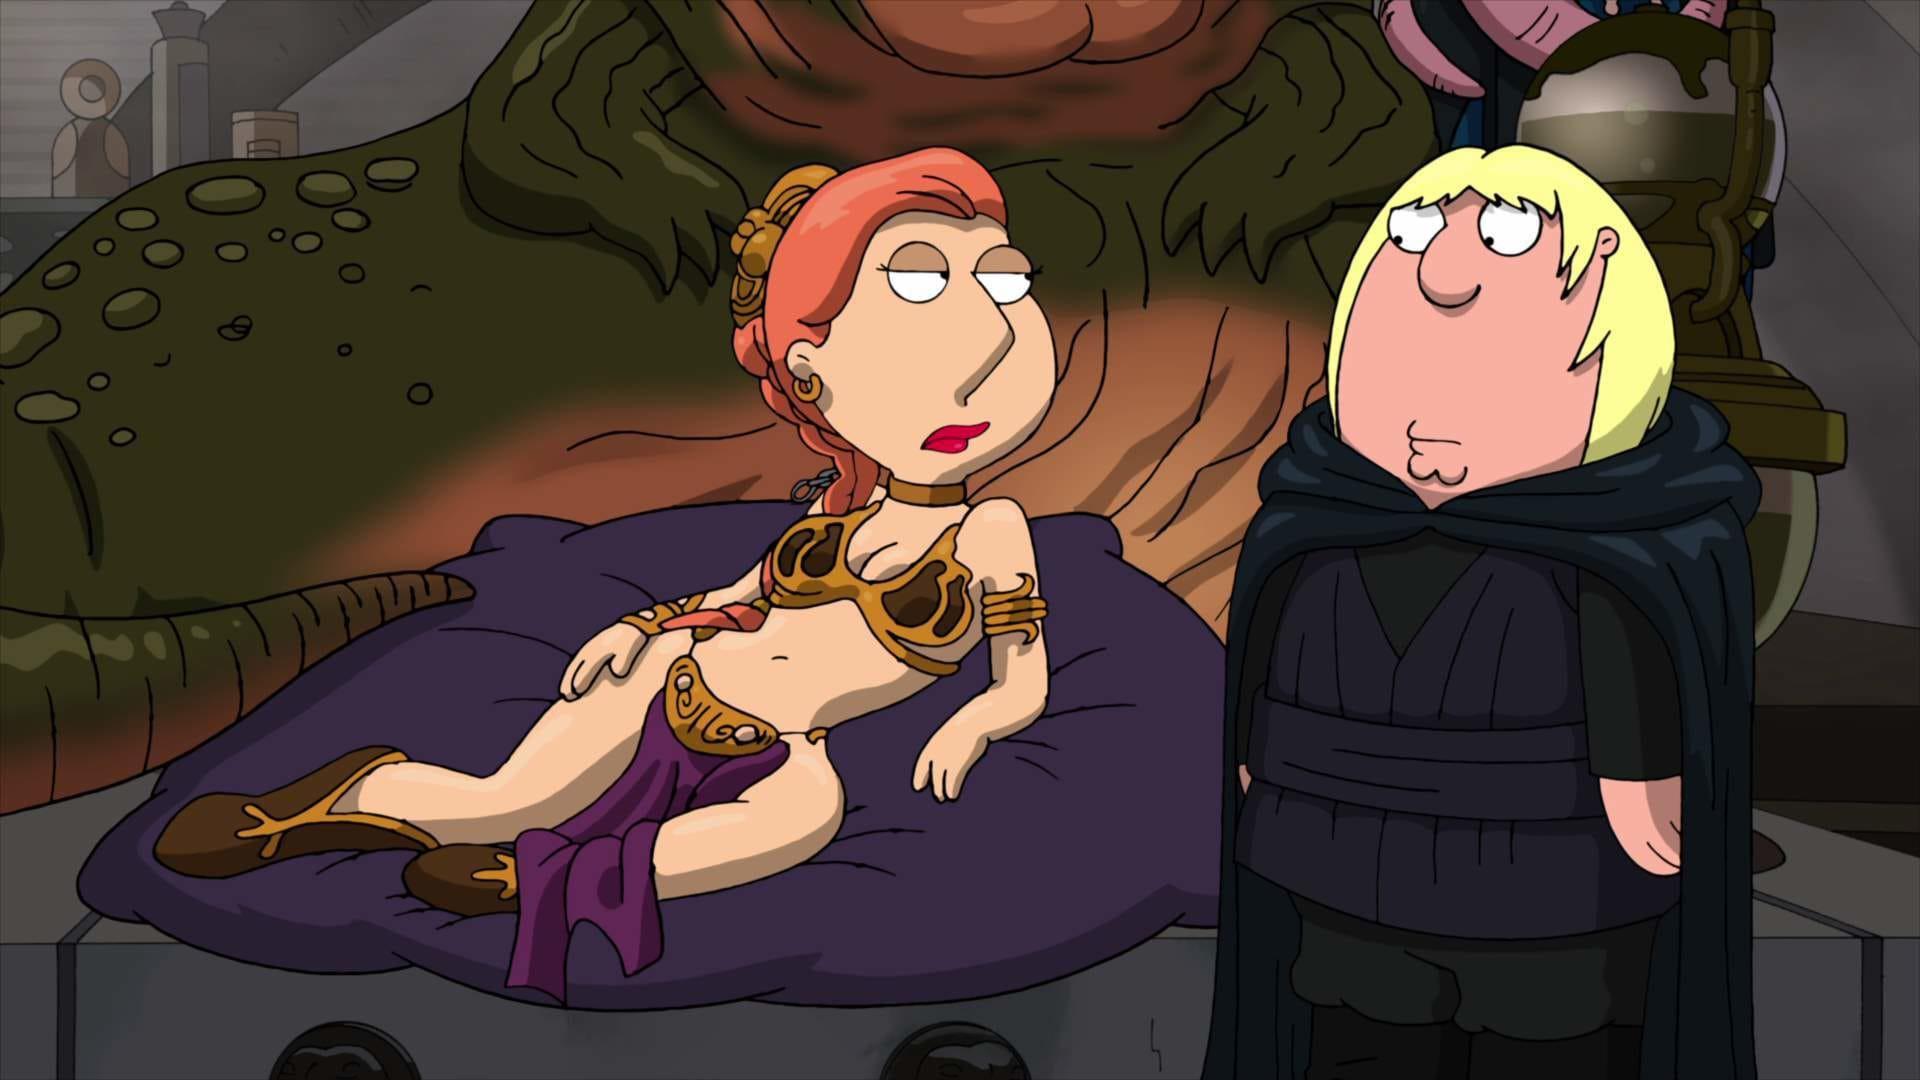 Family Guy Presents: It's a Trap!